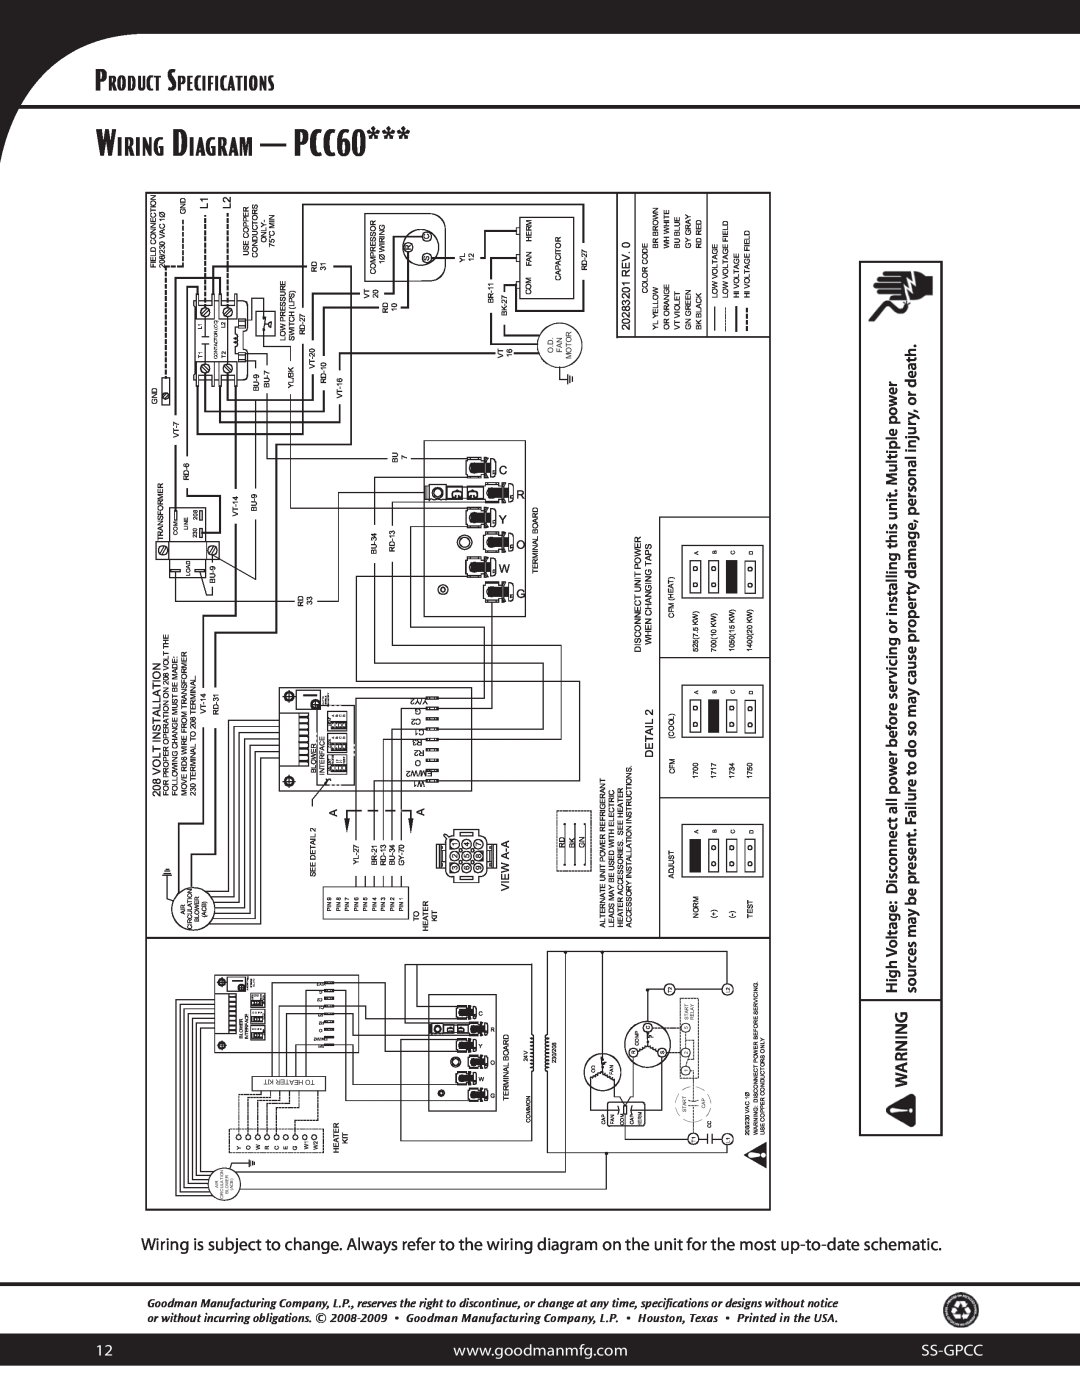 Goodman Mfg 10.3 EER specifications Ss-Gpcc, Product Specifications, 20283201 REV, A-Aview, Disconnect Unit Power 